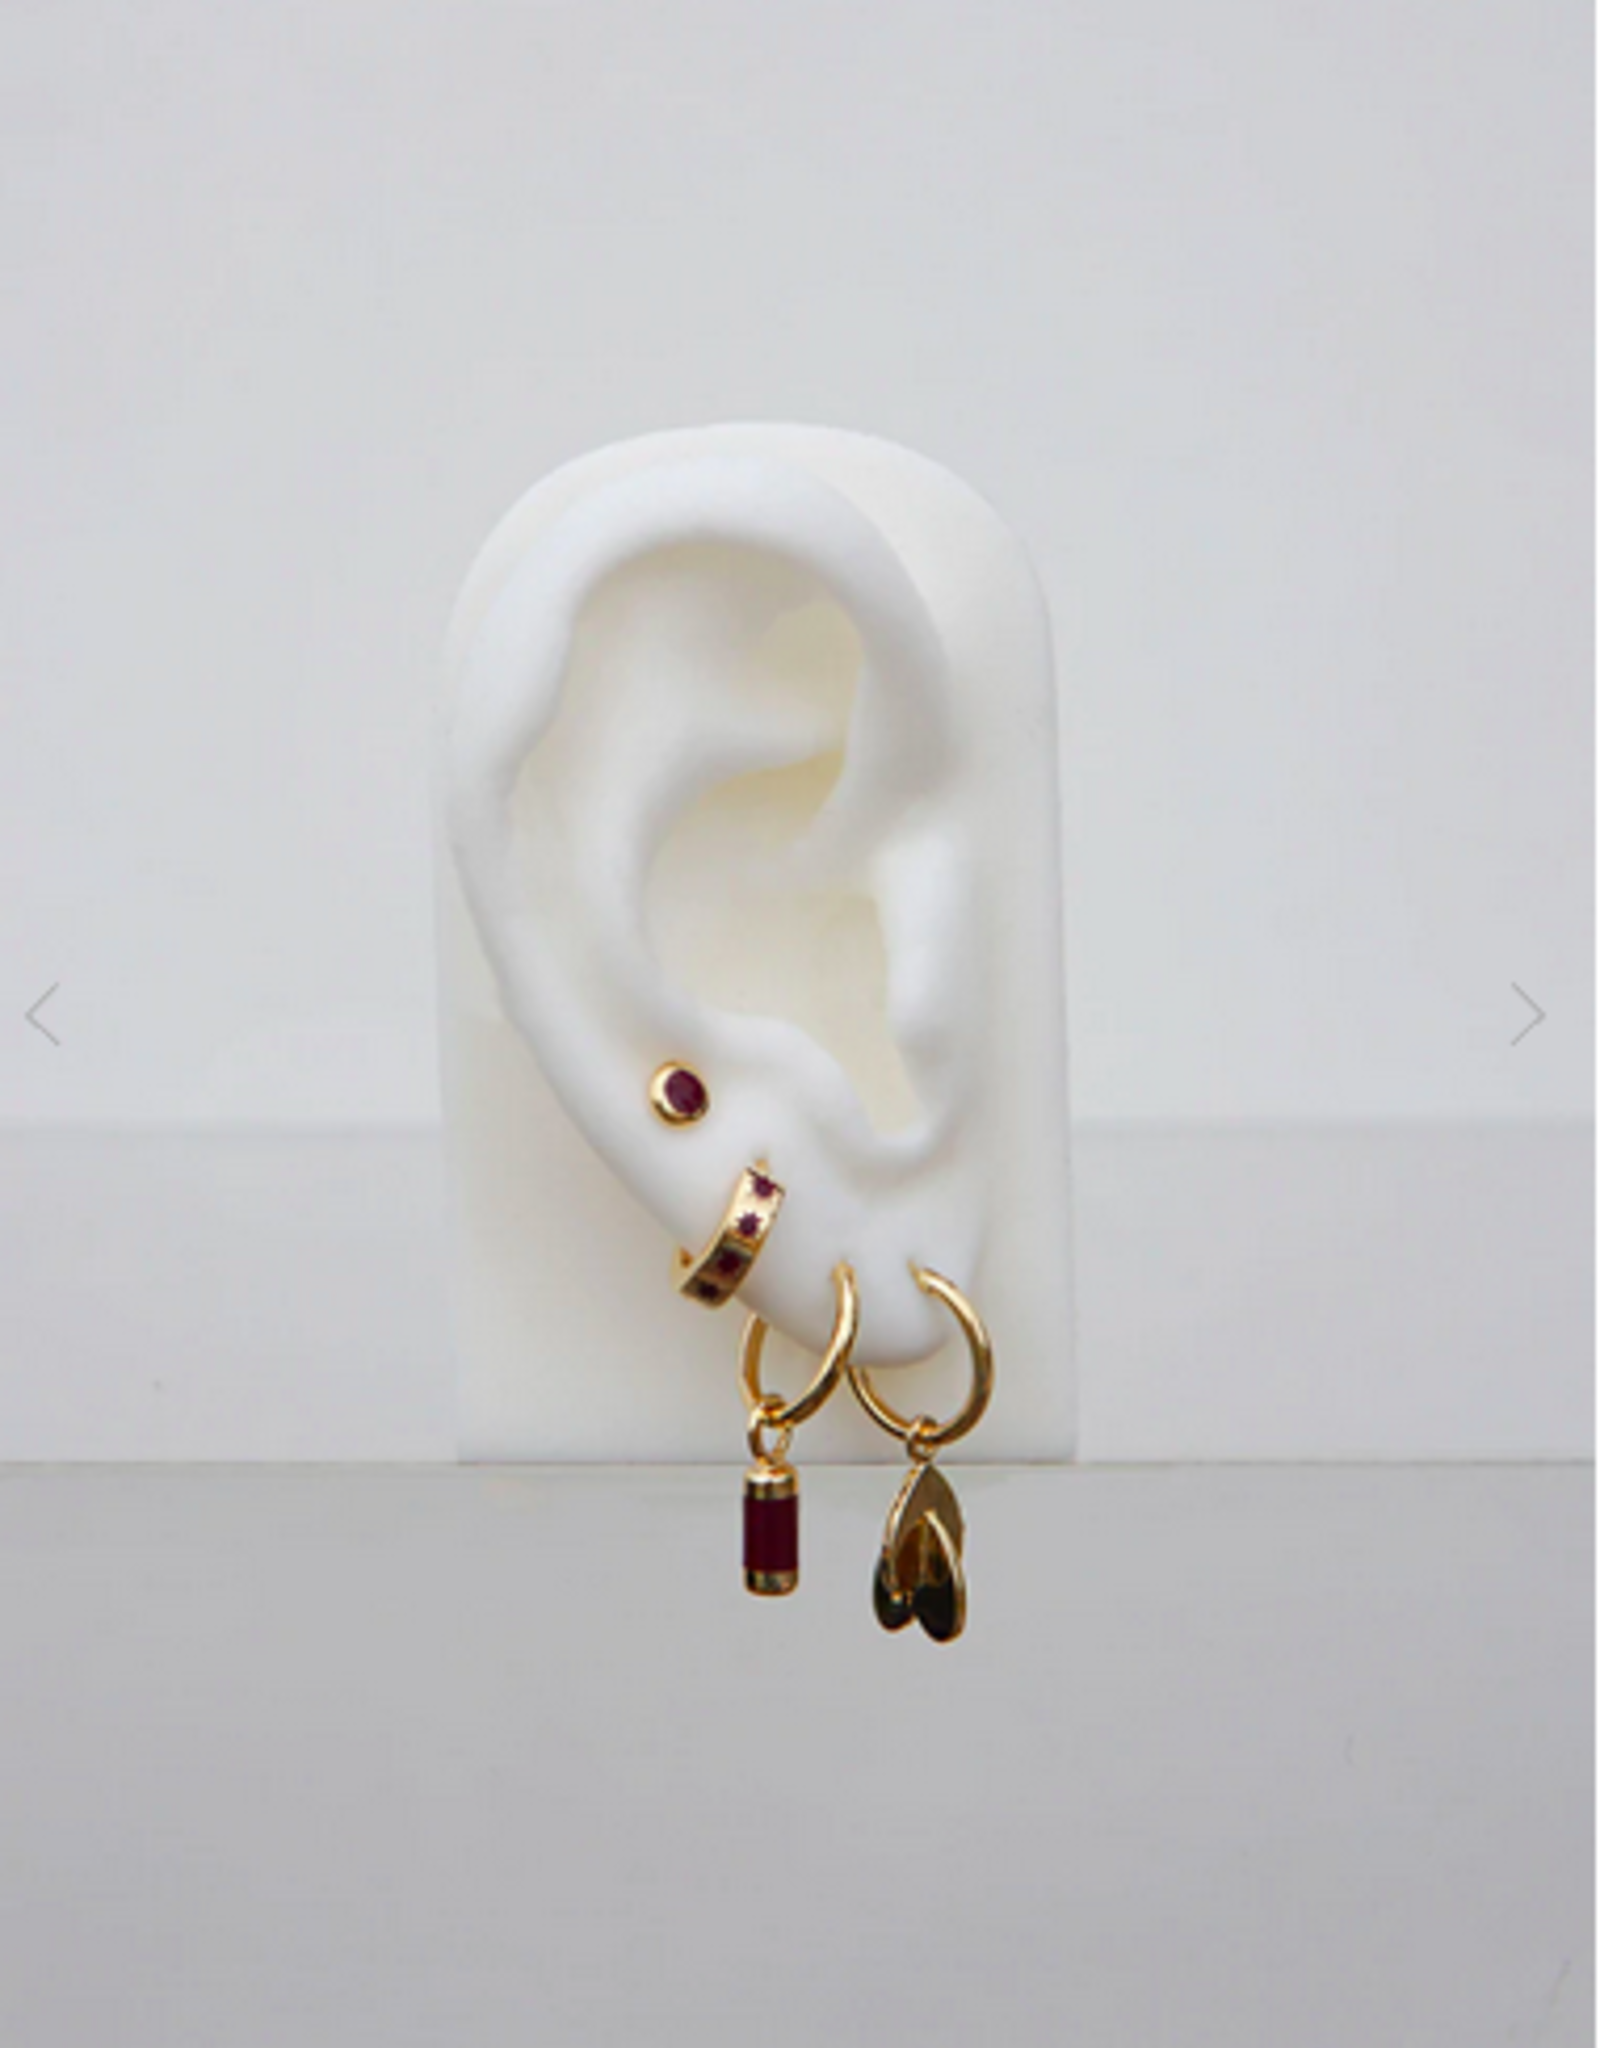 Wildthings Collectables Bordeaux rose drop earring gold plated